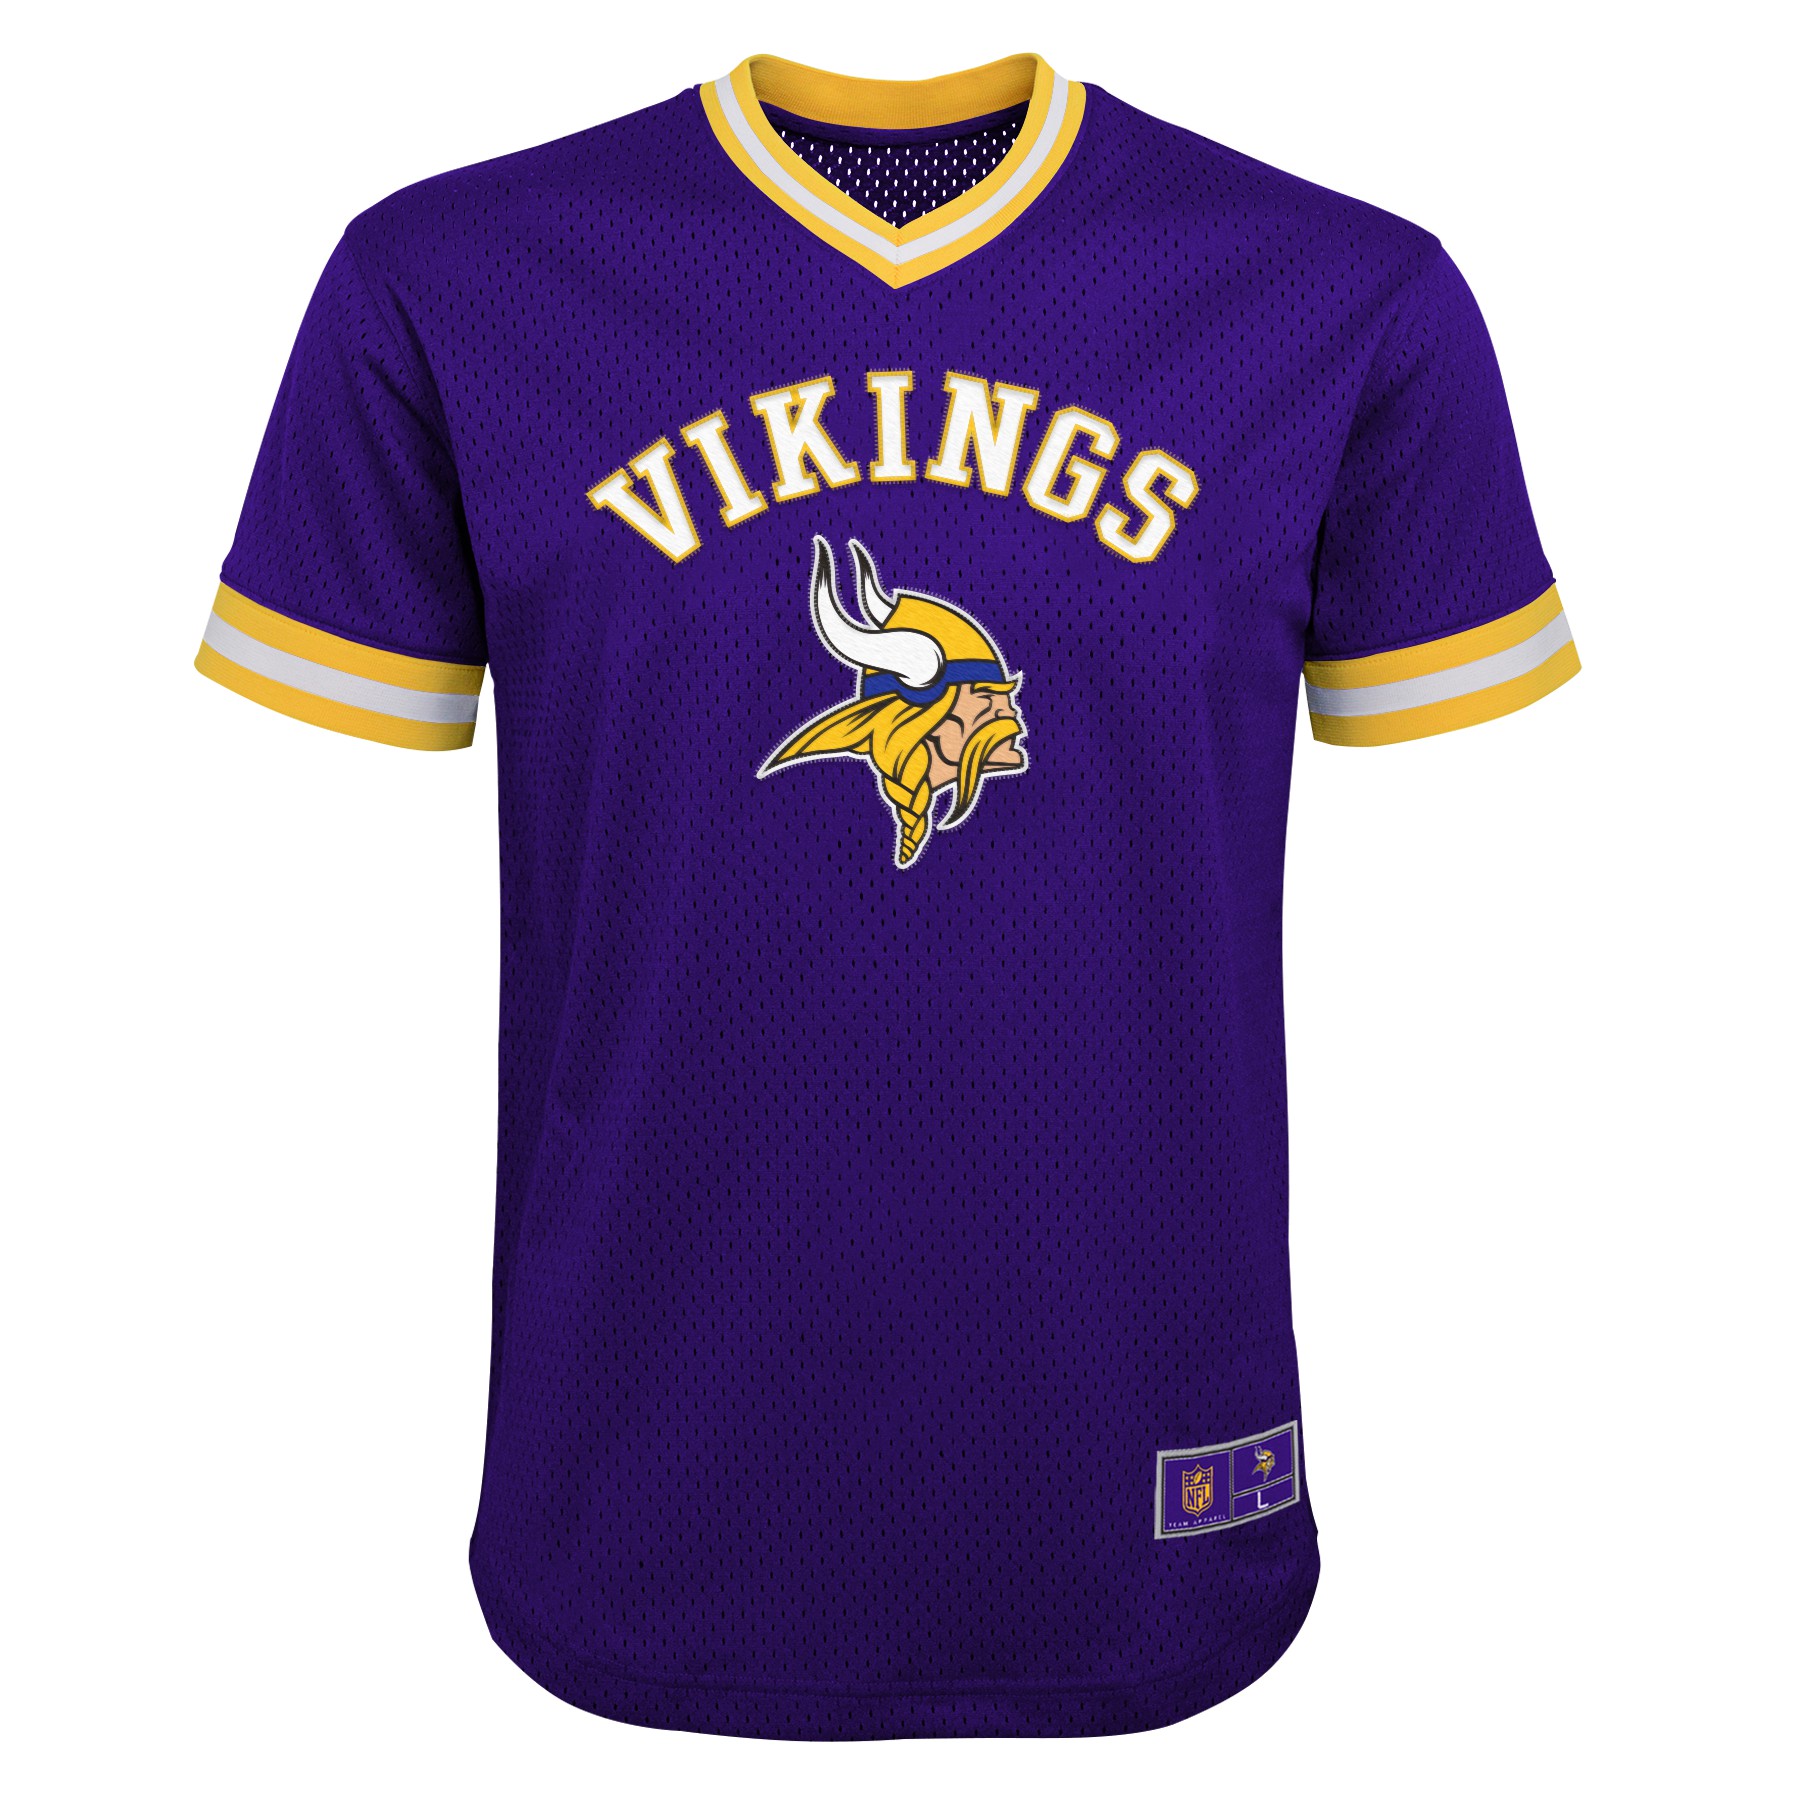 Outerstuff NFL Youth Boys (8-20) Minnesota Vikings Tackle Twill V-Neck ...